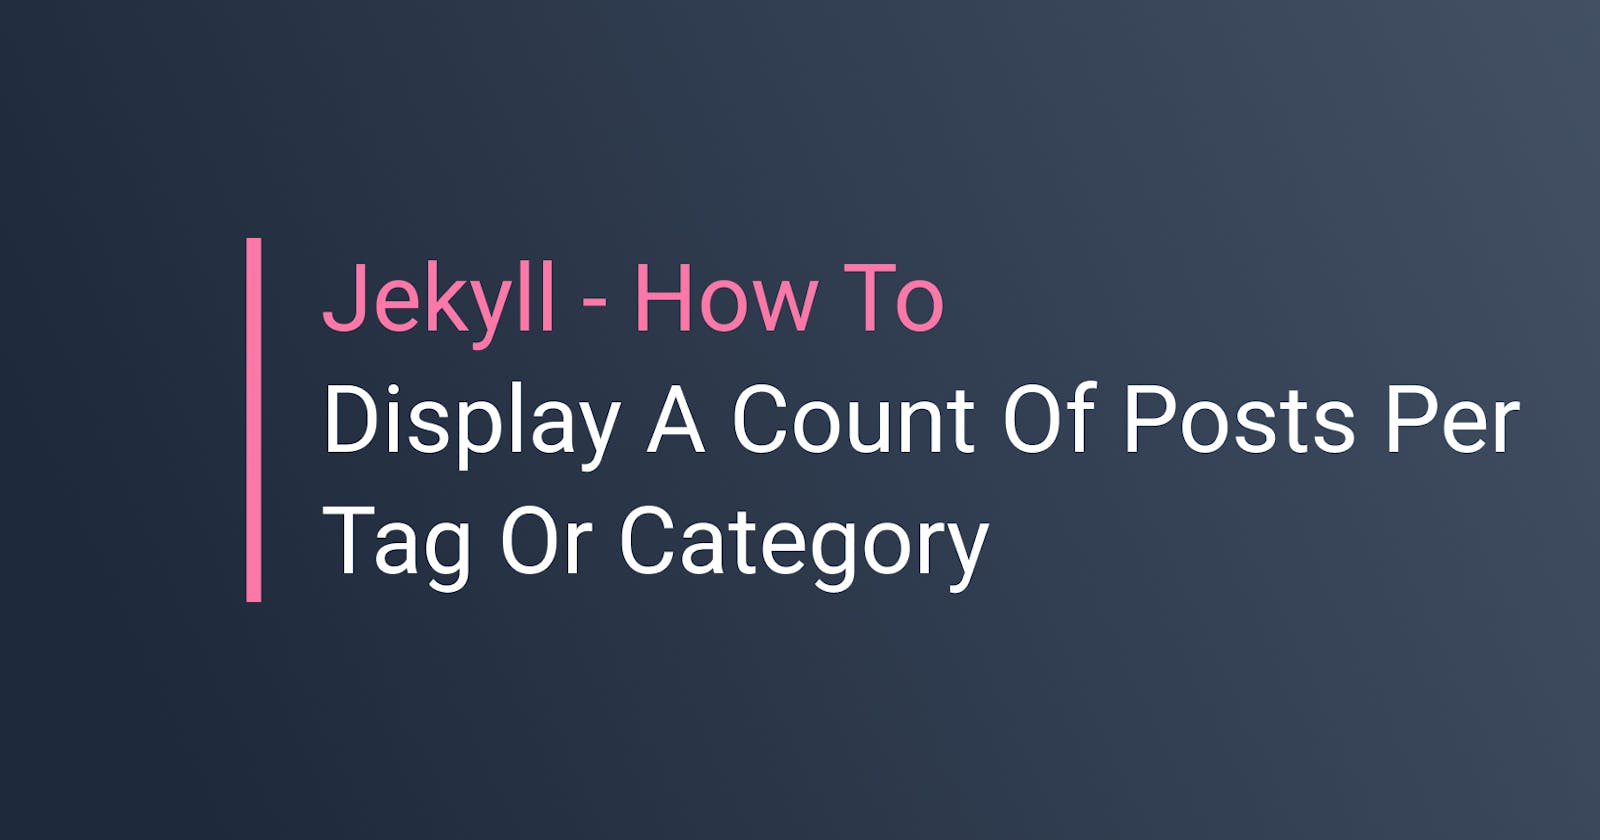 Jekyll - How To Display A Count Of Posts Per Tag Or Category